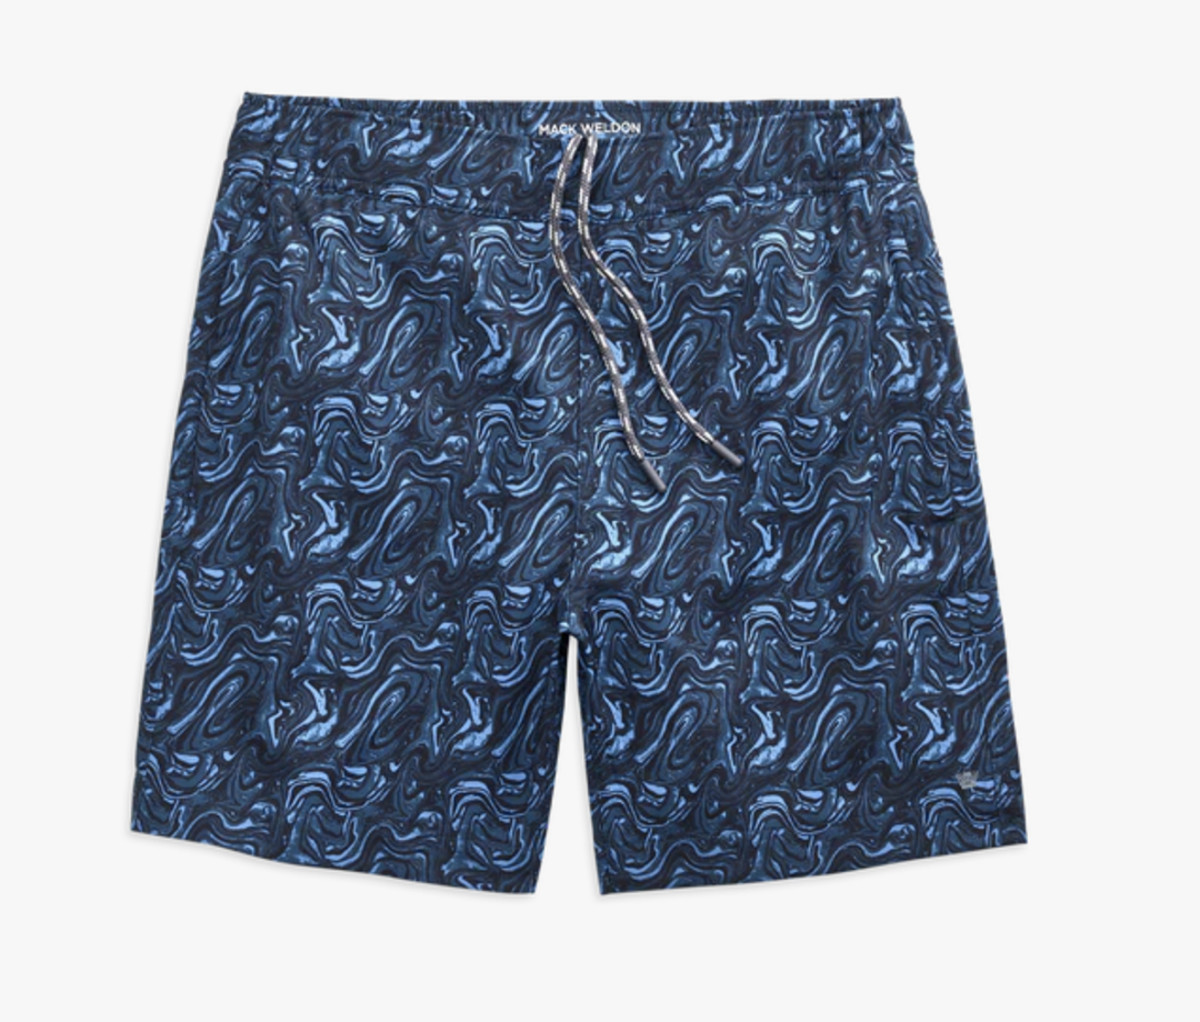 These Swim Trunks From Mack Weldon are a Serious Upgrade - Men's Journal